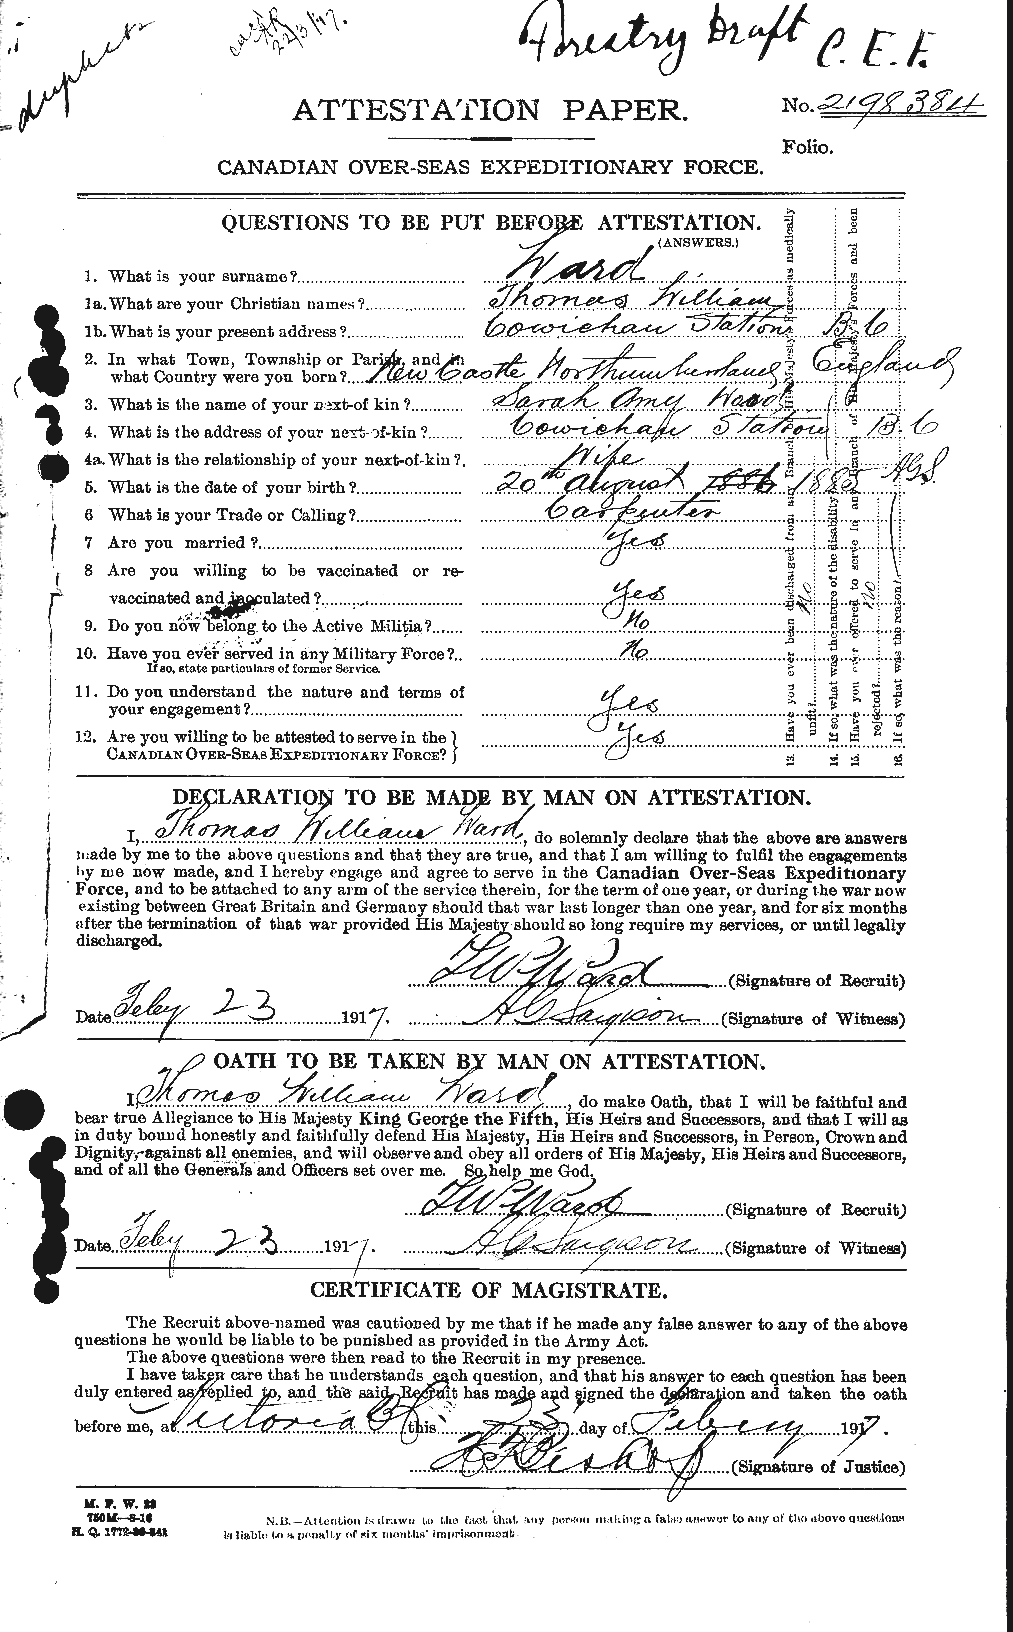 Personnel Records of the First World War - CEF 659736a